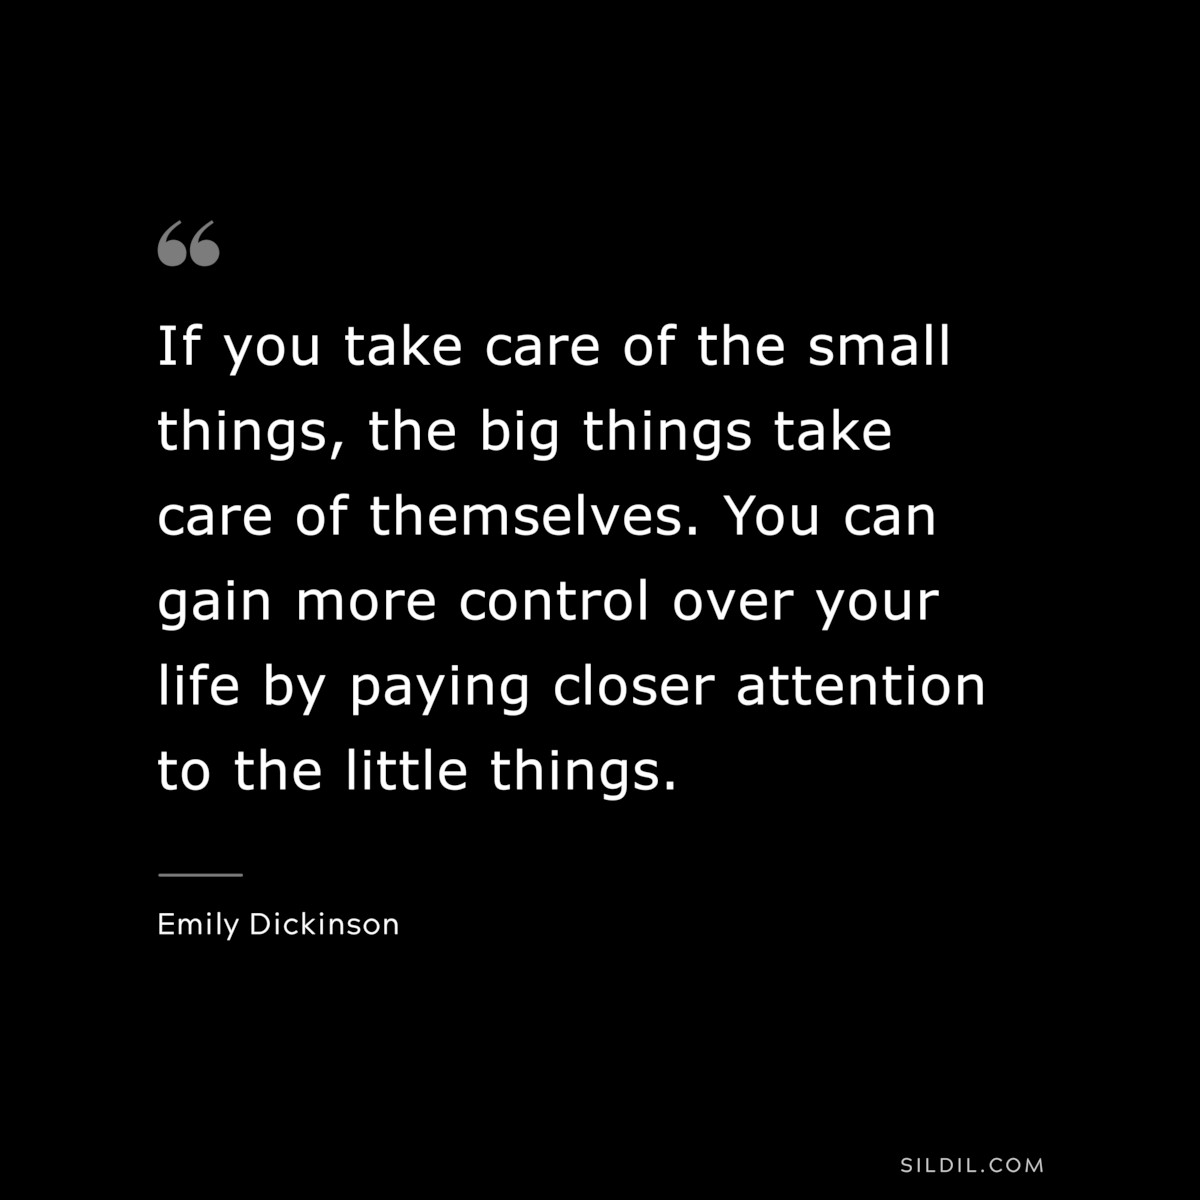 If you take care of the small things, the big things take care of themselves. You can gain more control over your life by paying closer attention to the little things.